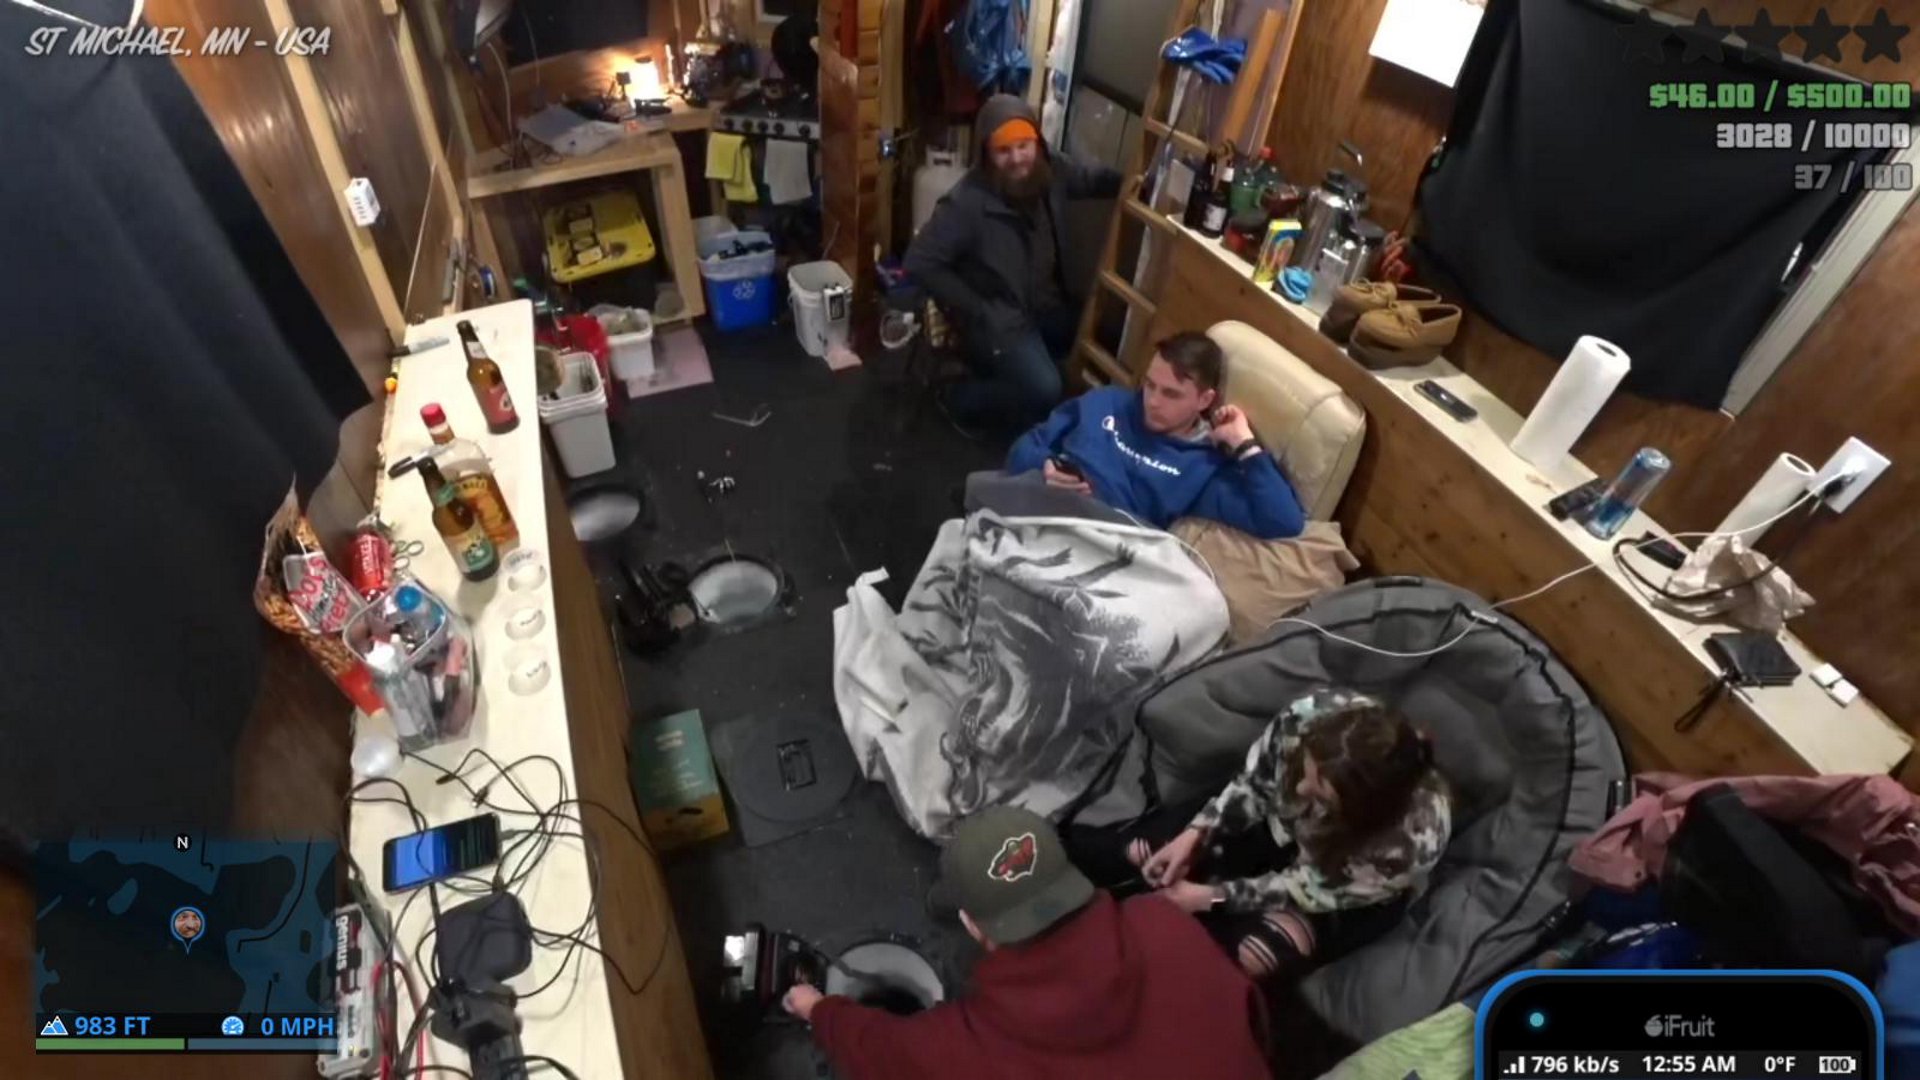 ice-fishing-with-friends-mandi-mike-multi-just-chatting-0301-https-t-co-mrzx0vquhr-https-t-co-nkds38aqsj